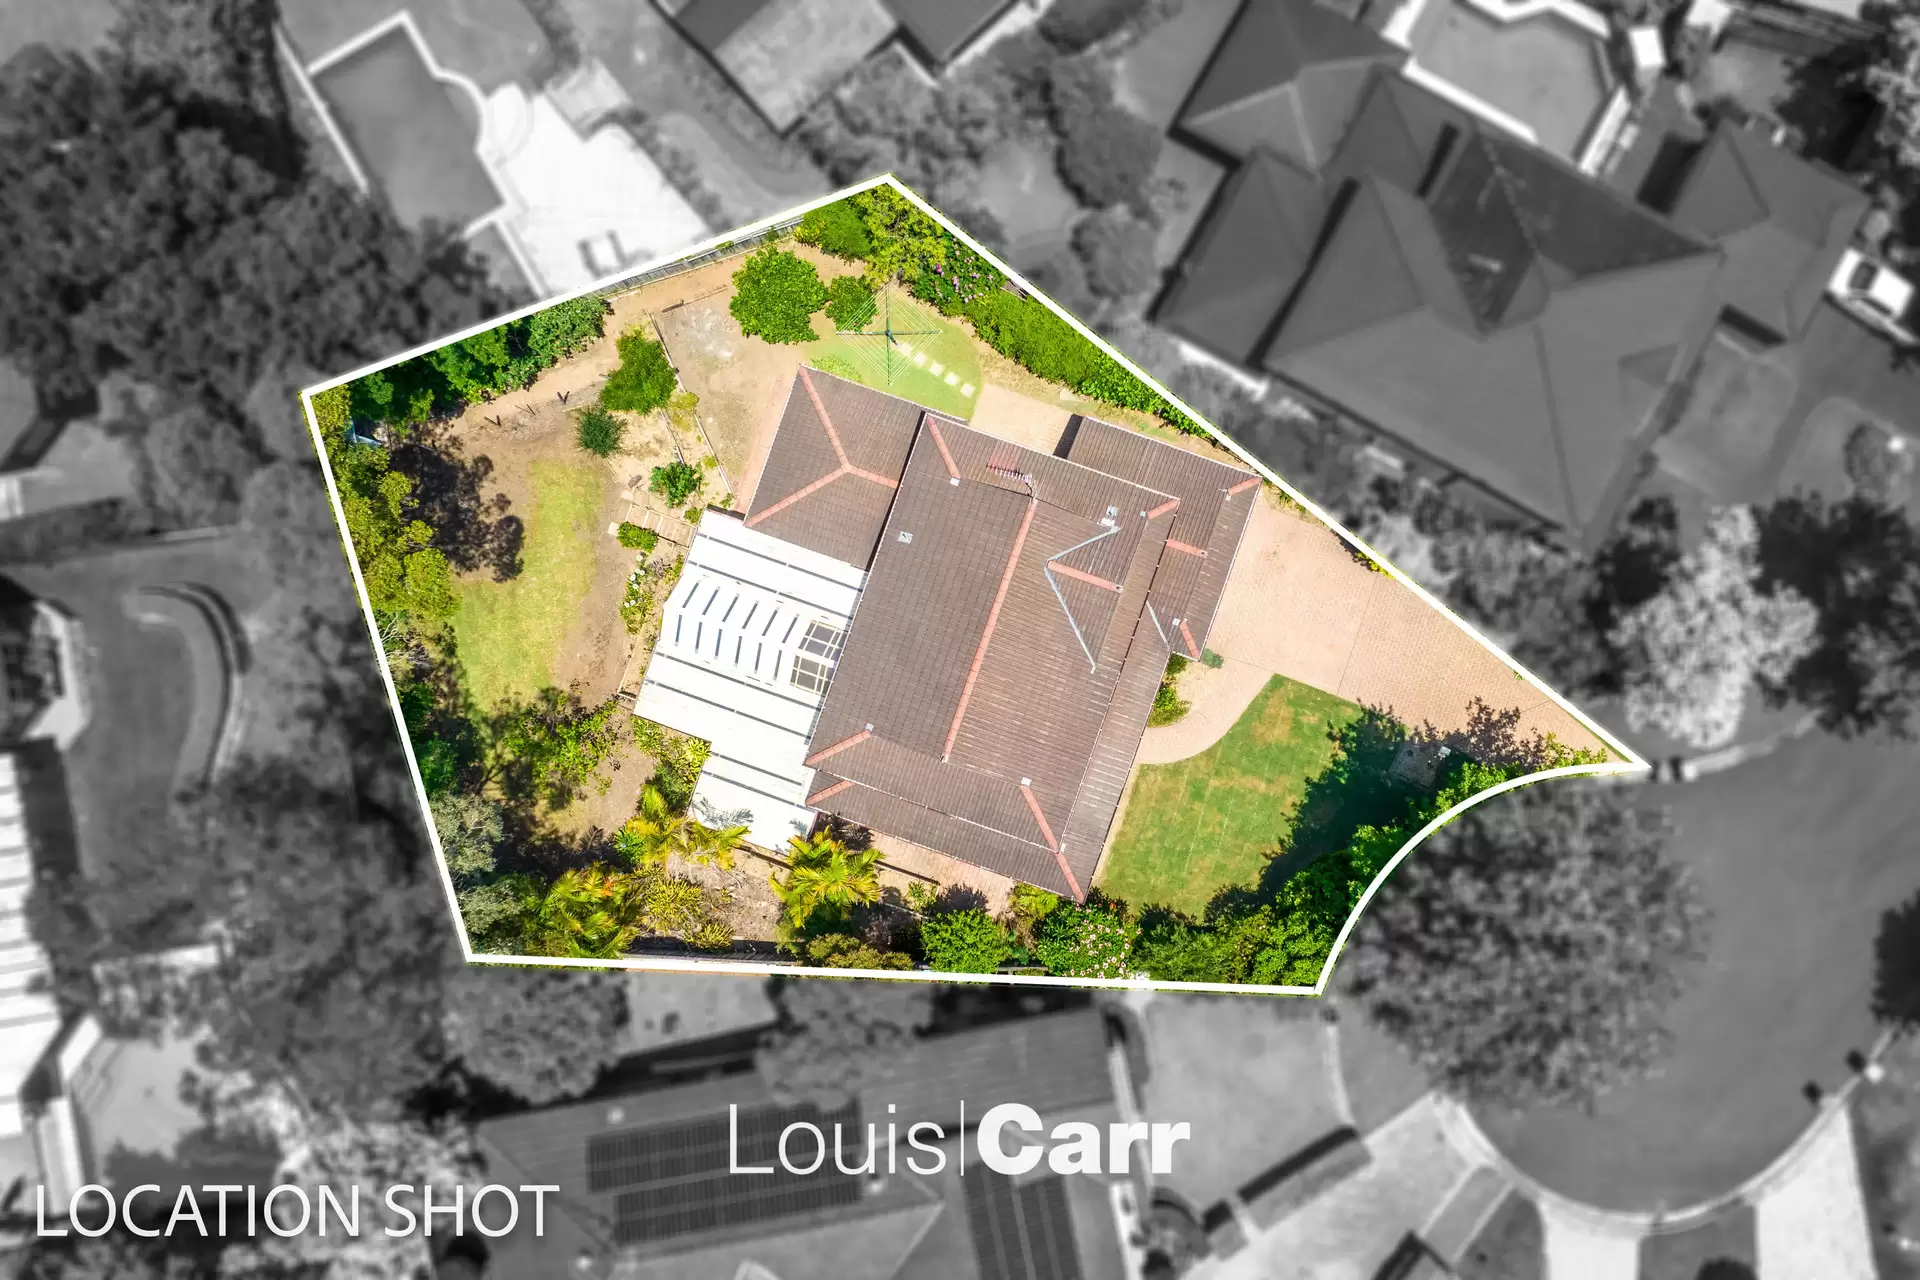 Photo #14: 4 Kingussie Avenue, Castle Hill - Sold by Louis Carr Real Estate